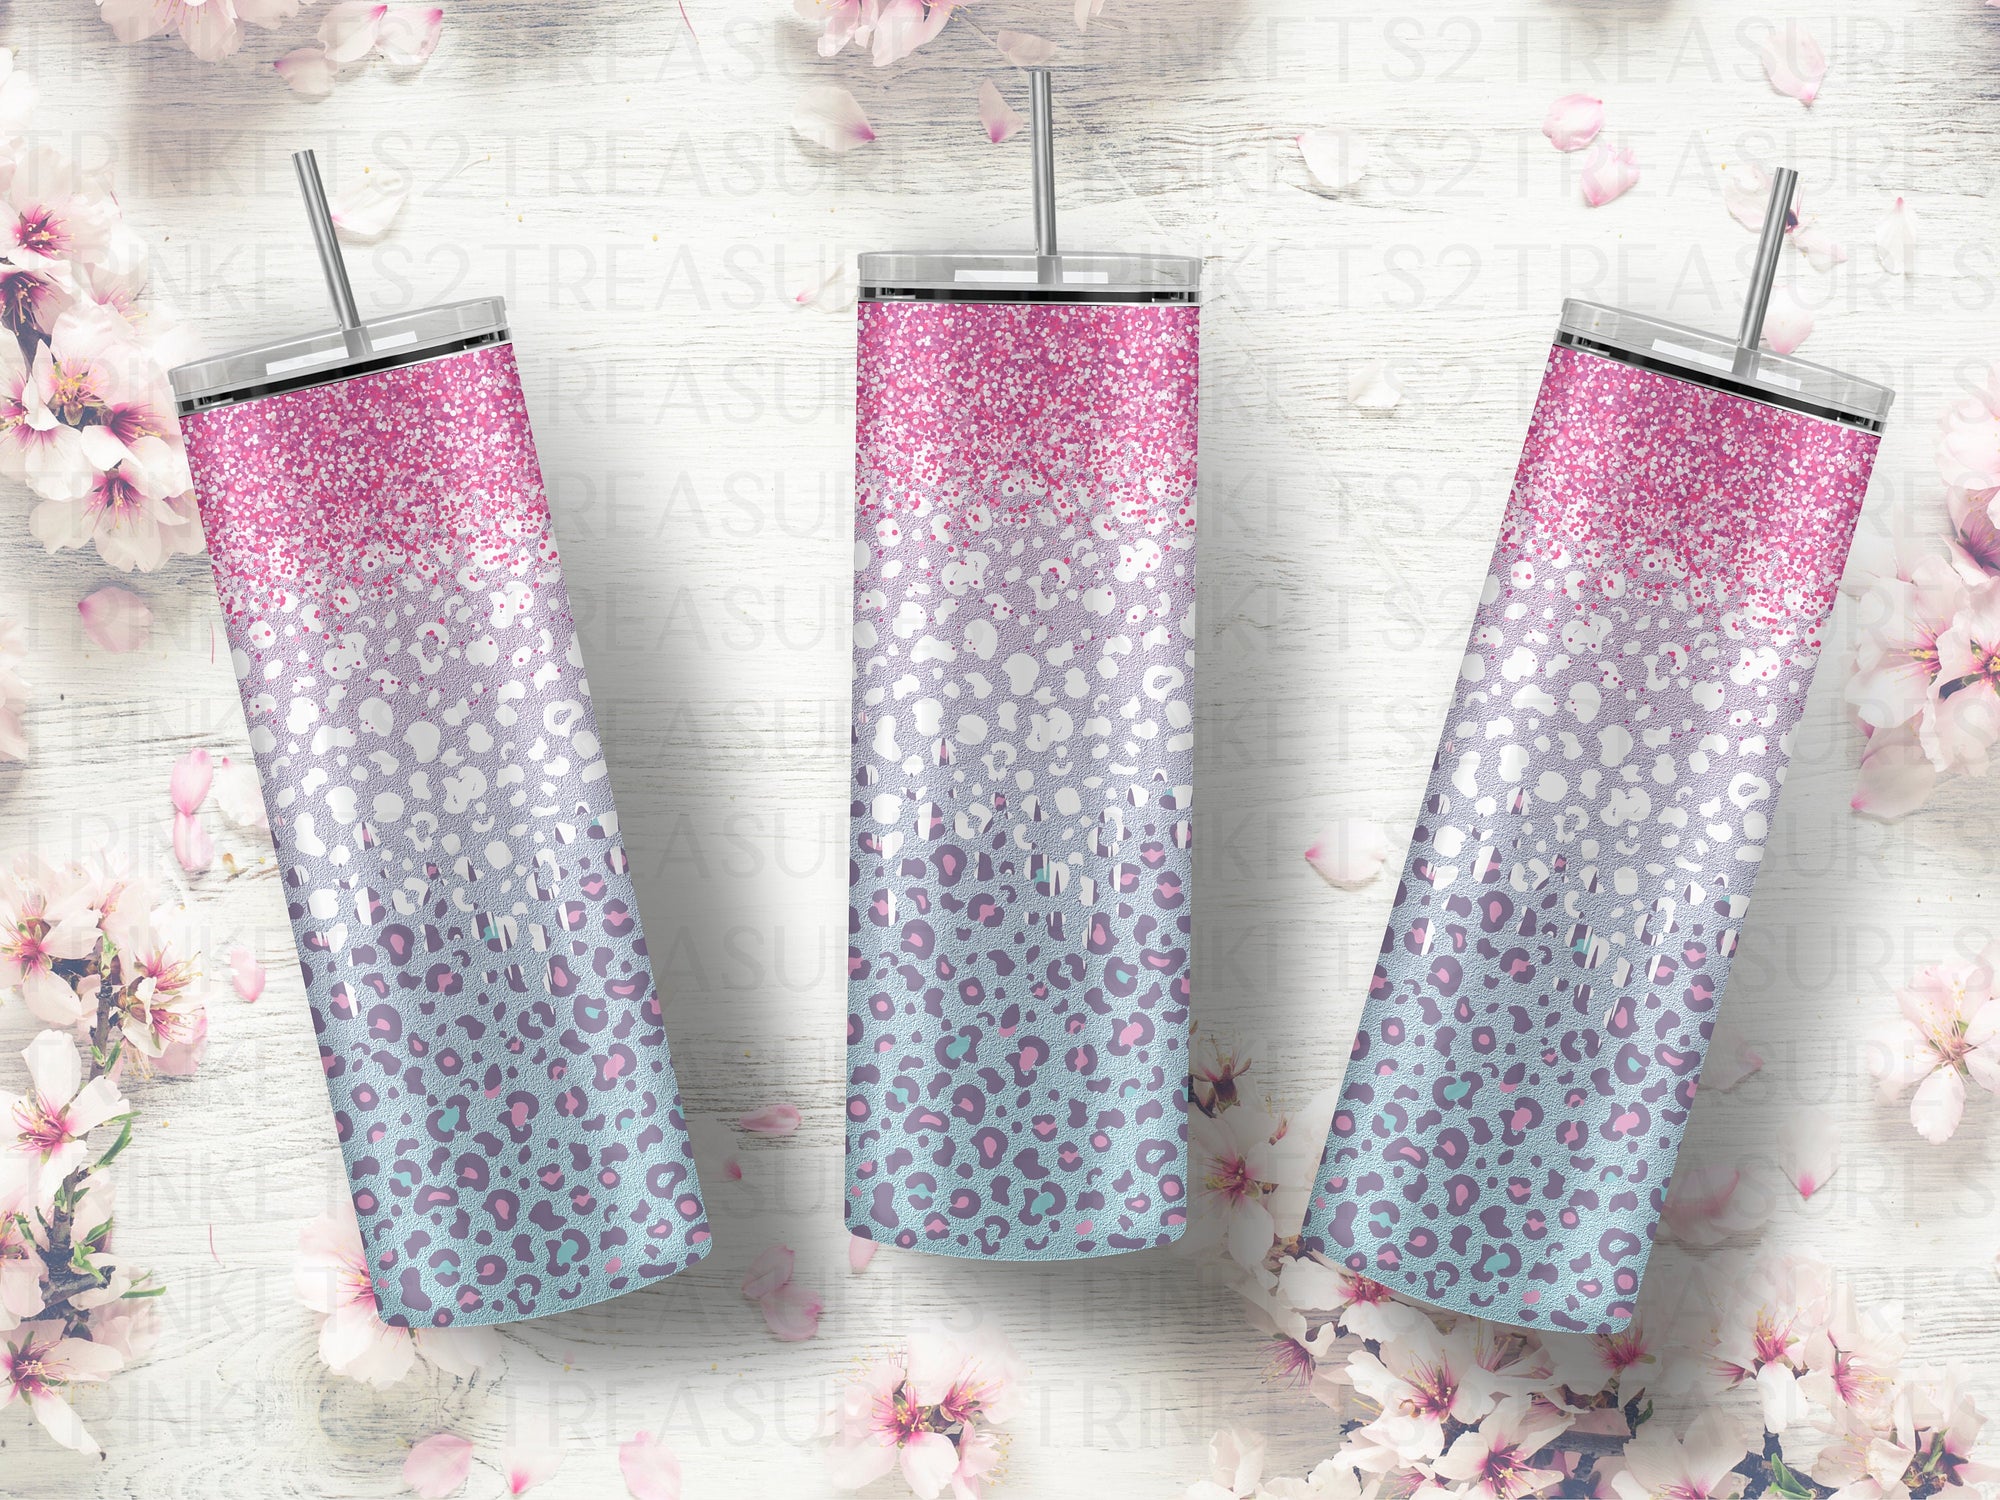 Personalized 20 oz Stainless Steel Tumbler/Includes Metal Straw/Pink Glitter Design/#319